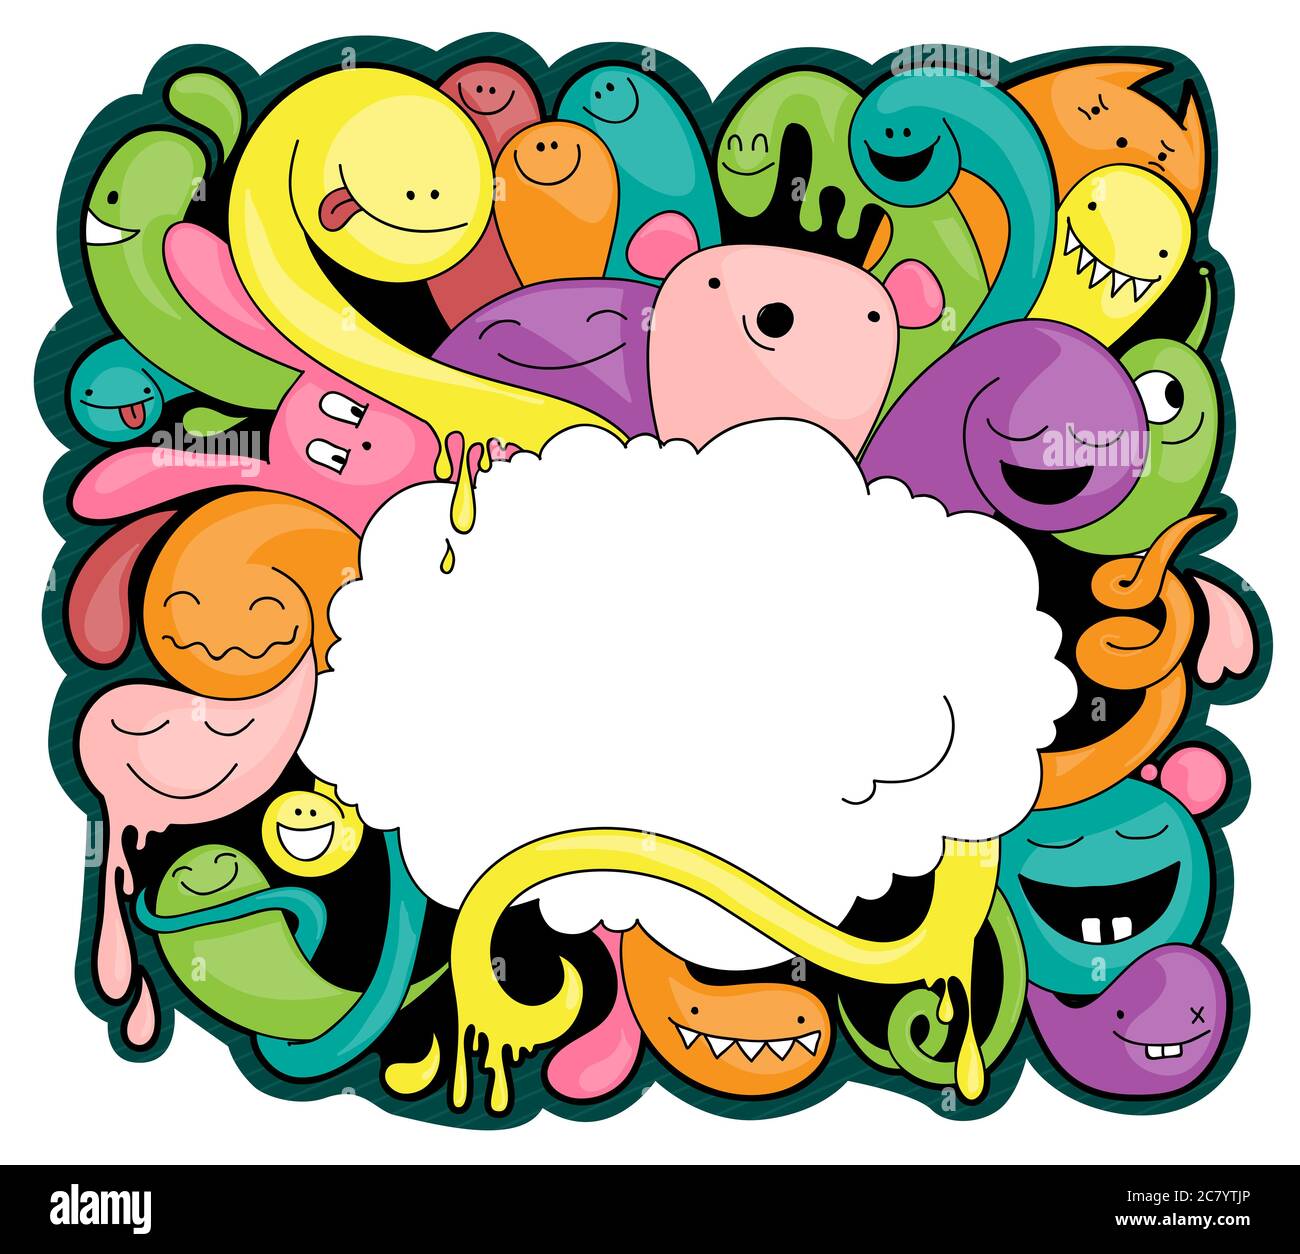 Funny doodle of imaginary creatures. You can place your text in the cloud. Stock Photo